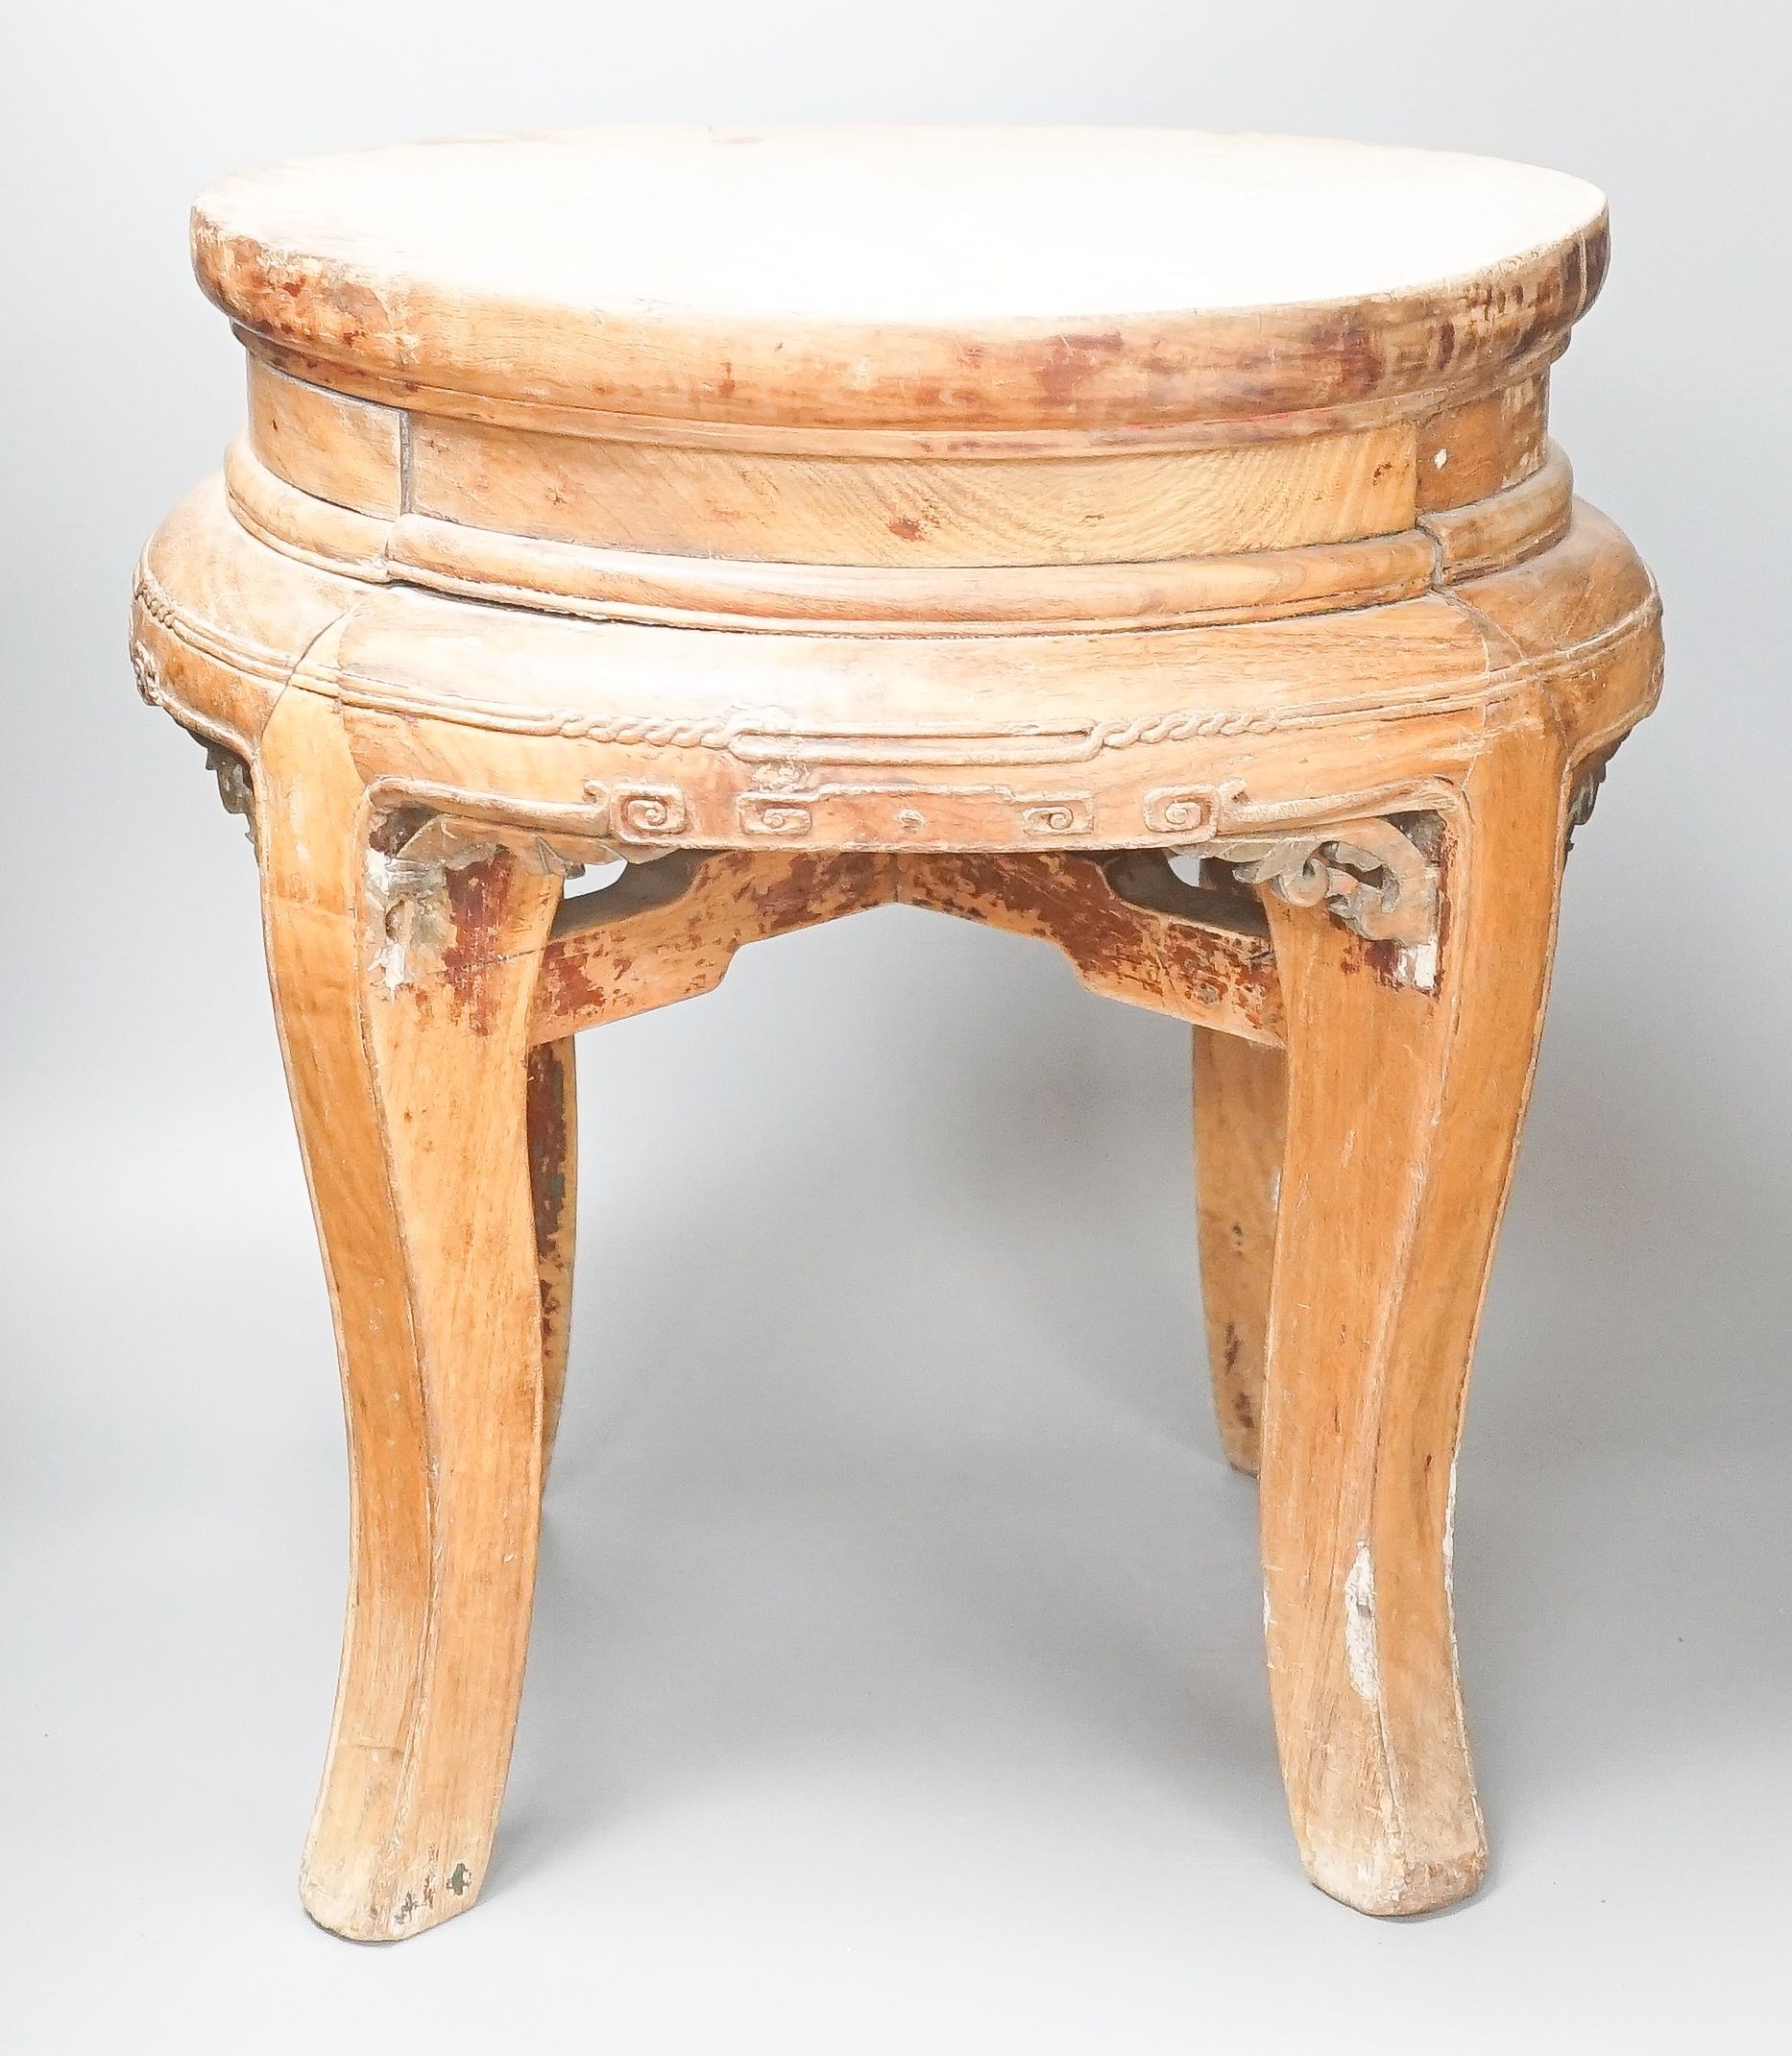 A 19th century Chinese stool or stand 47cm